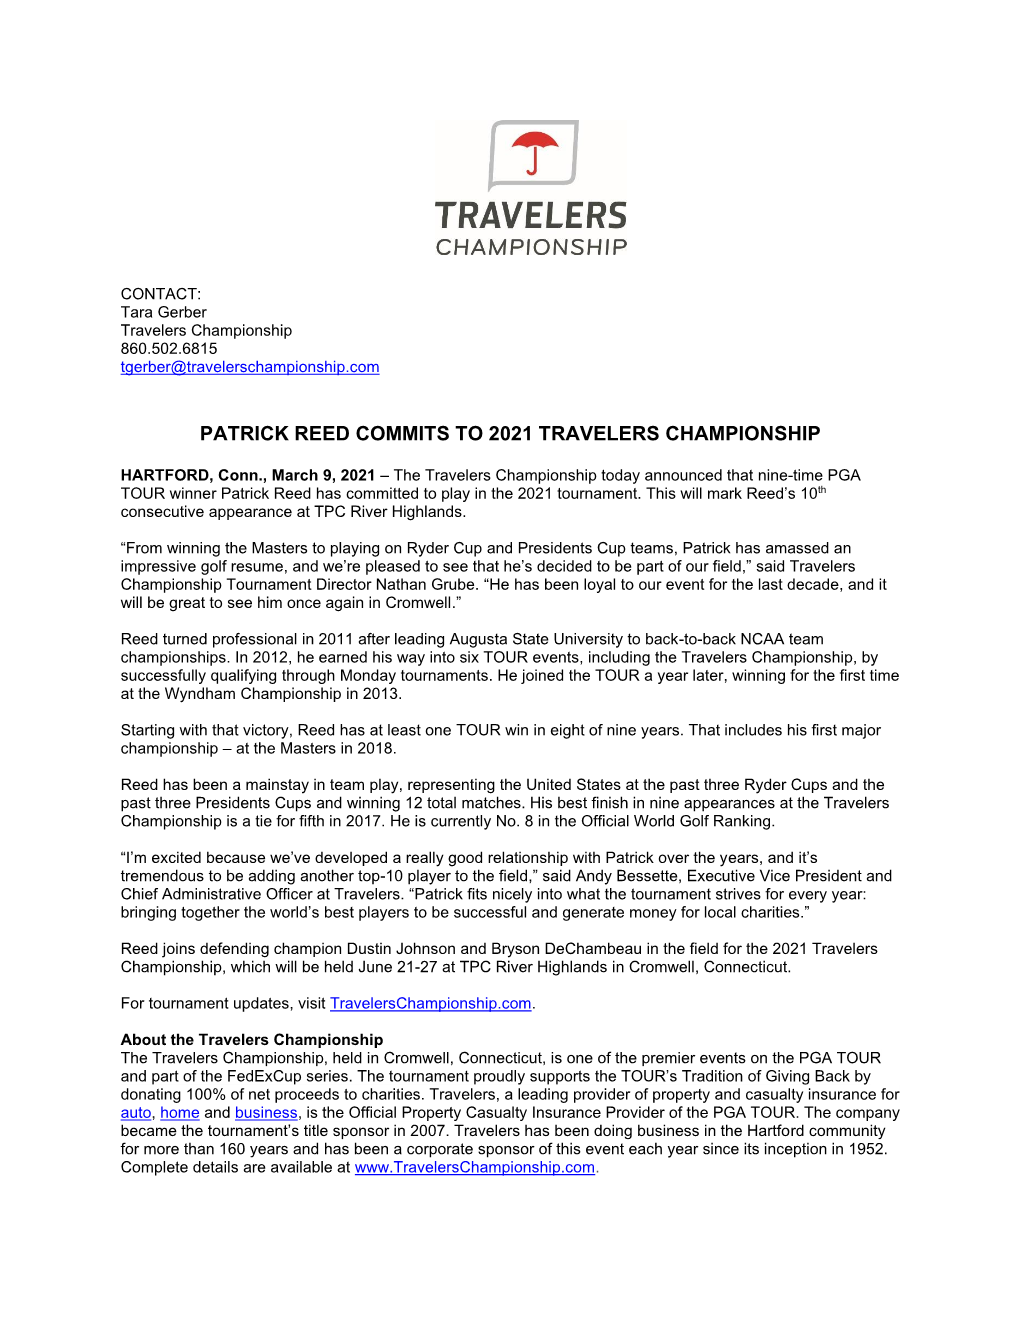 Patrick Reed Commits to 2021 Travelers Championship